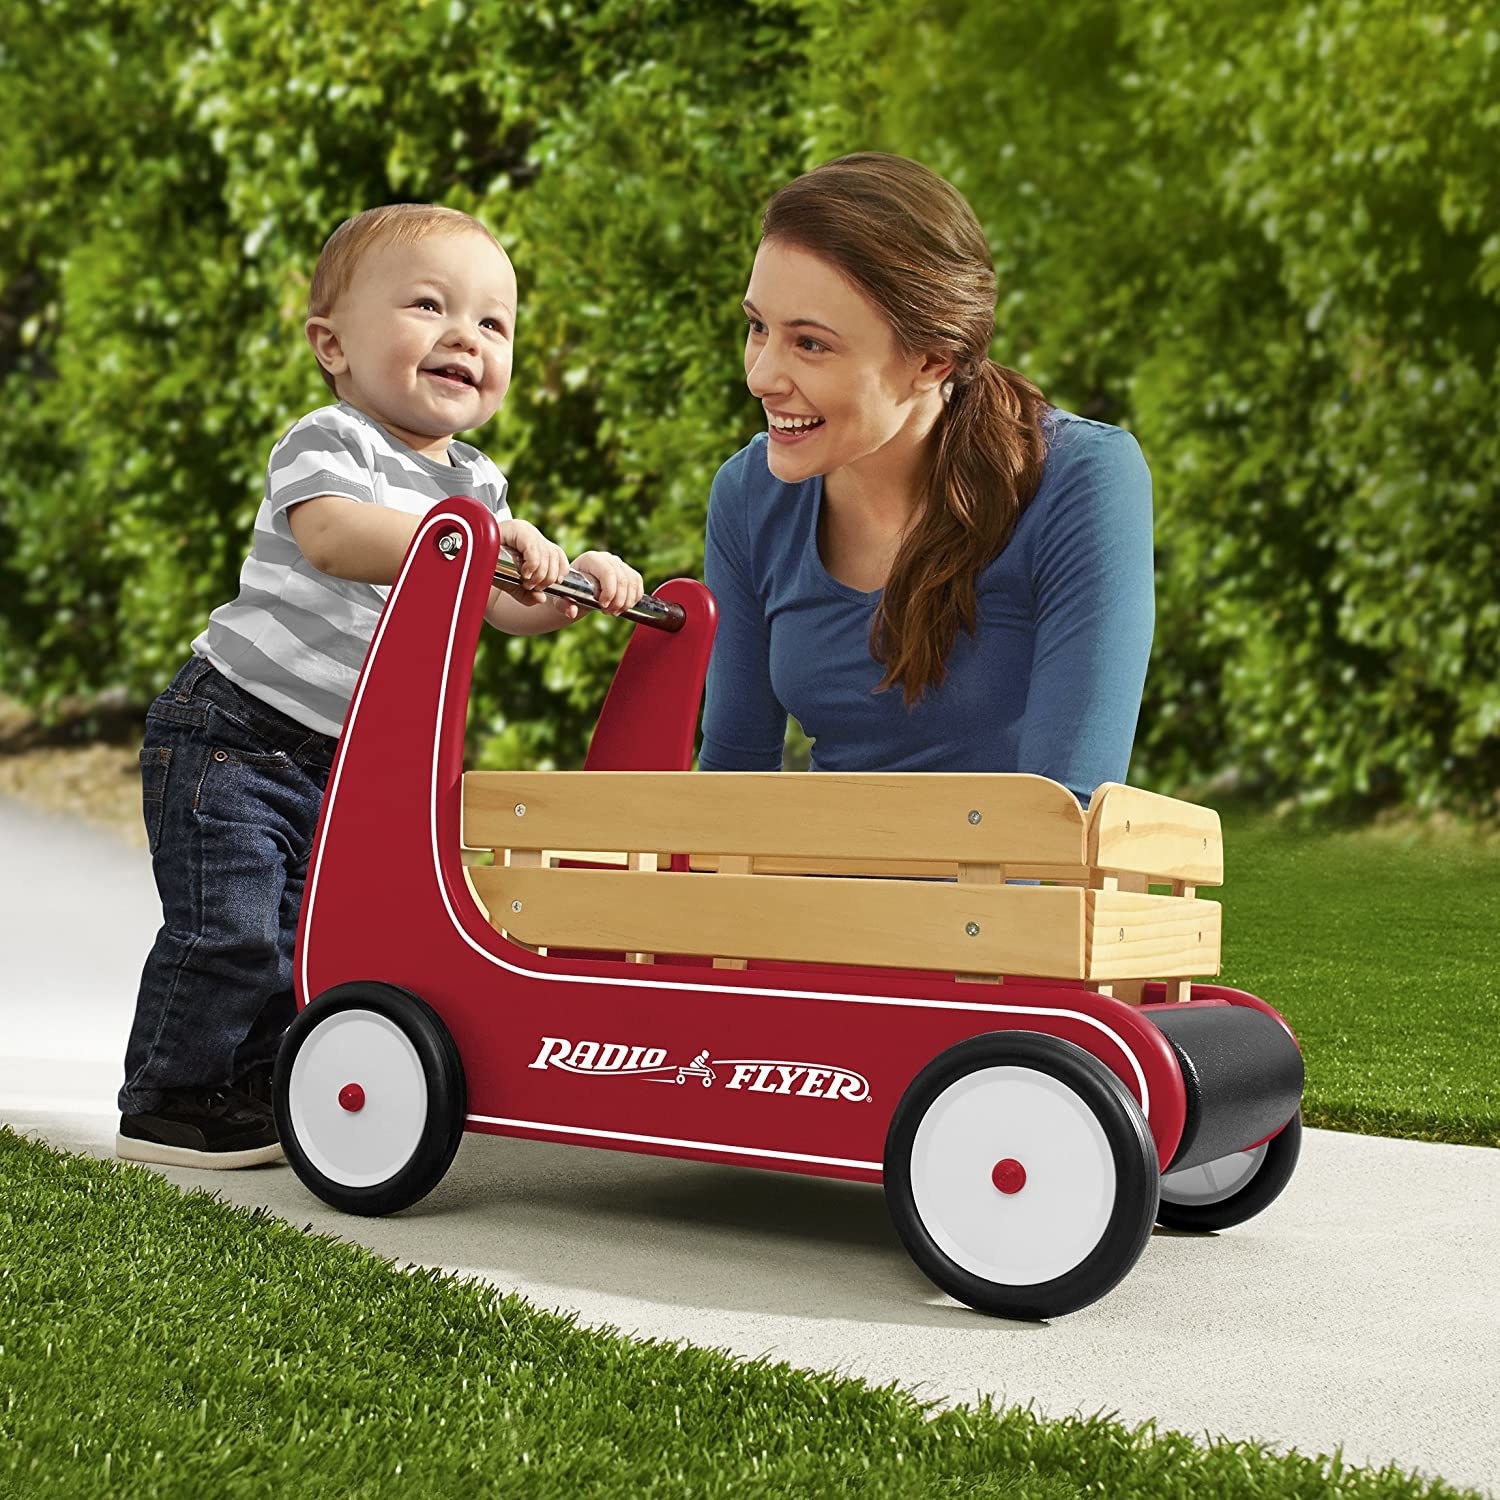 Model and child playing with red radio flyer wagon with side wood paneling